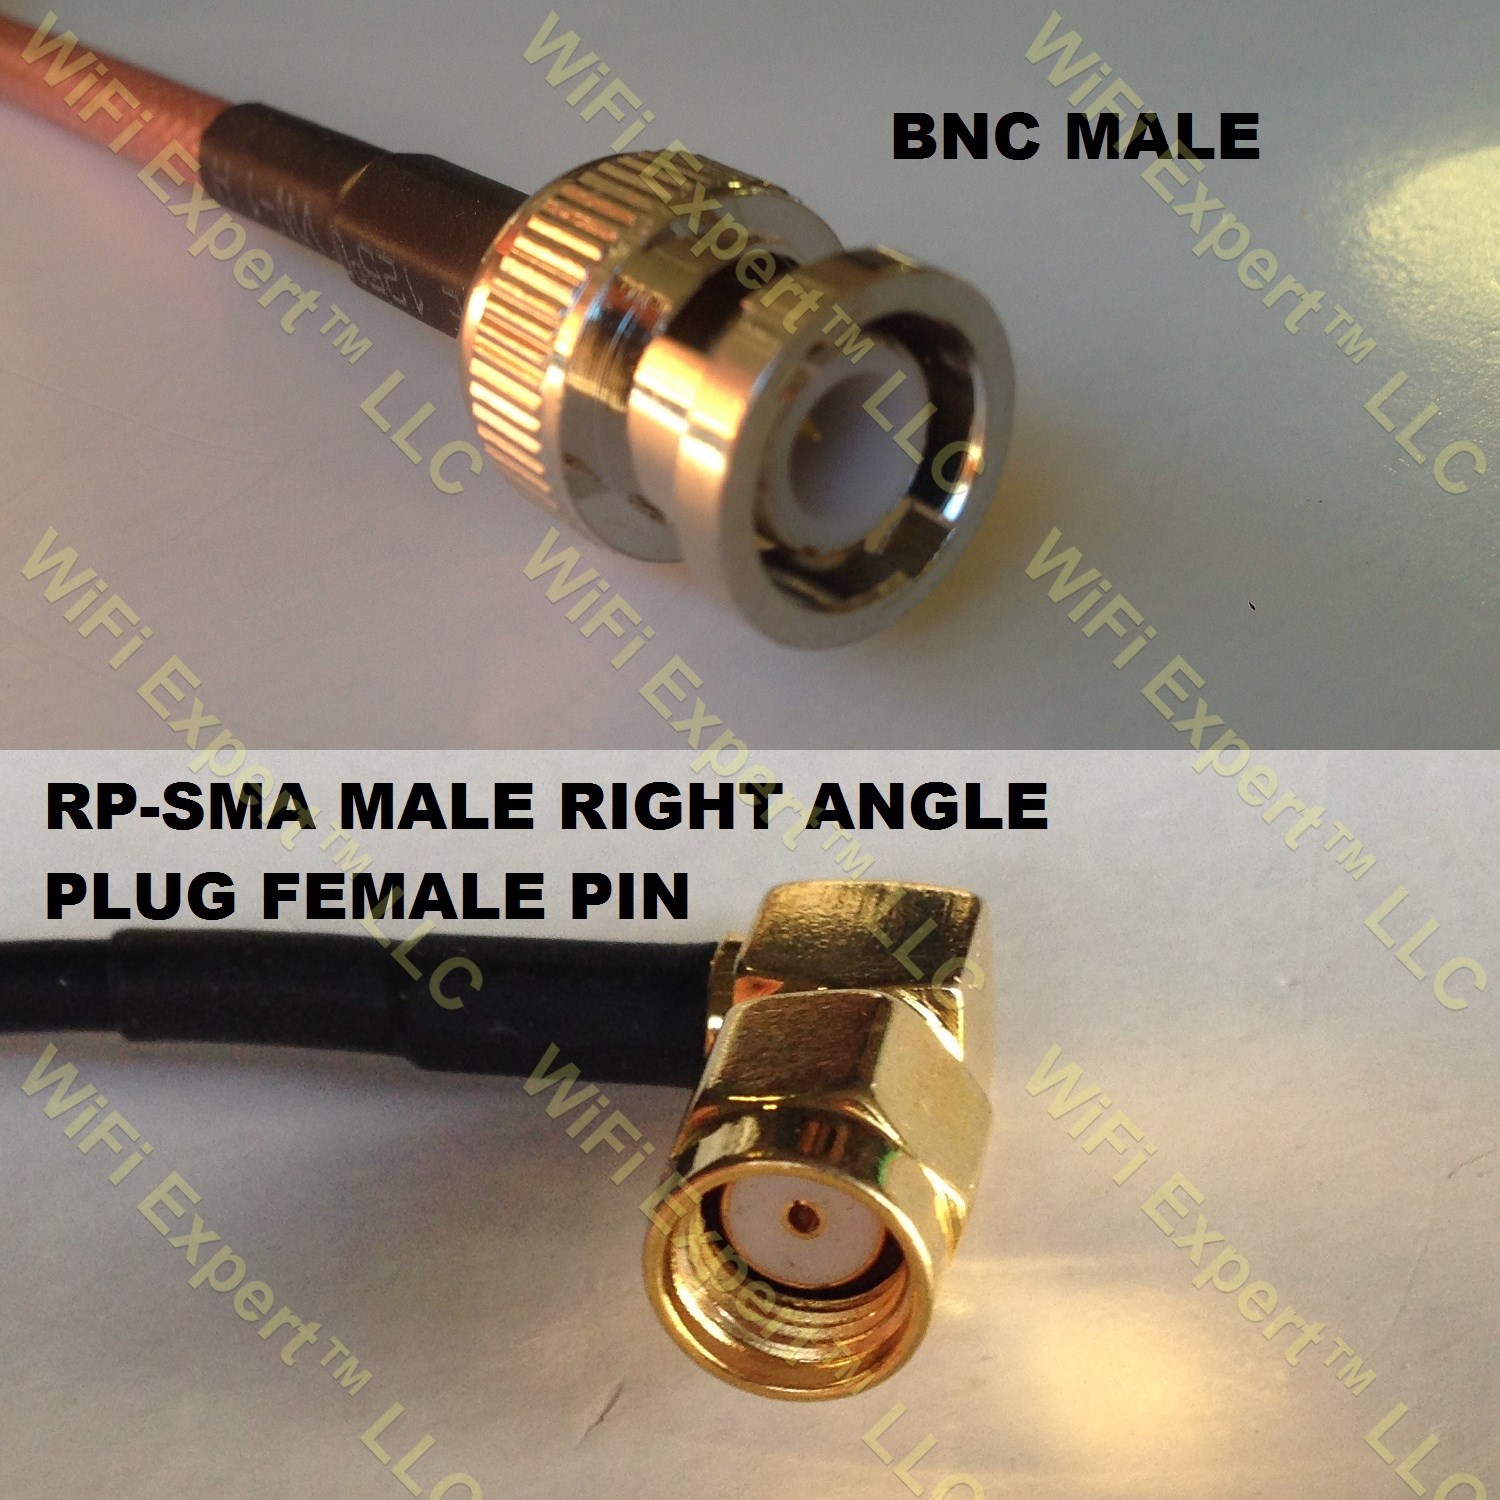 TIMES® 1-30 FT LMR195 COAX RF CABLE BNC MALE TO SMA or RP-SMA M/F STRAIGHT ANGLE 